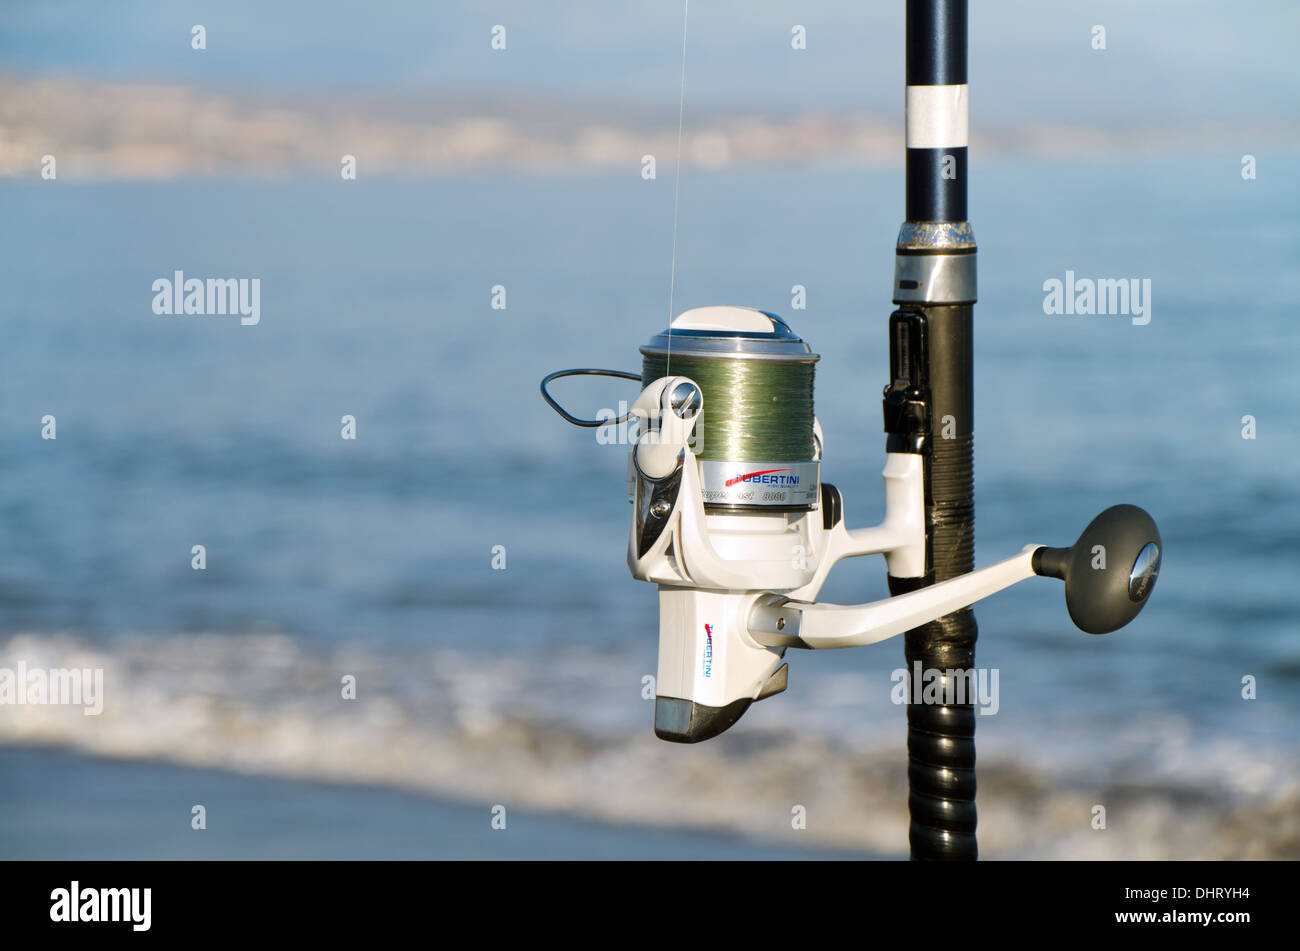 Detail of a fishing reel and rod with mediterranean sea in background. Malaga, Spain. Stock Photo